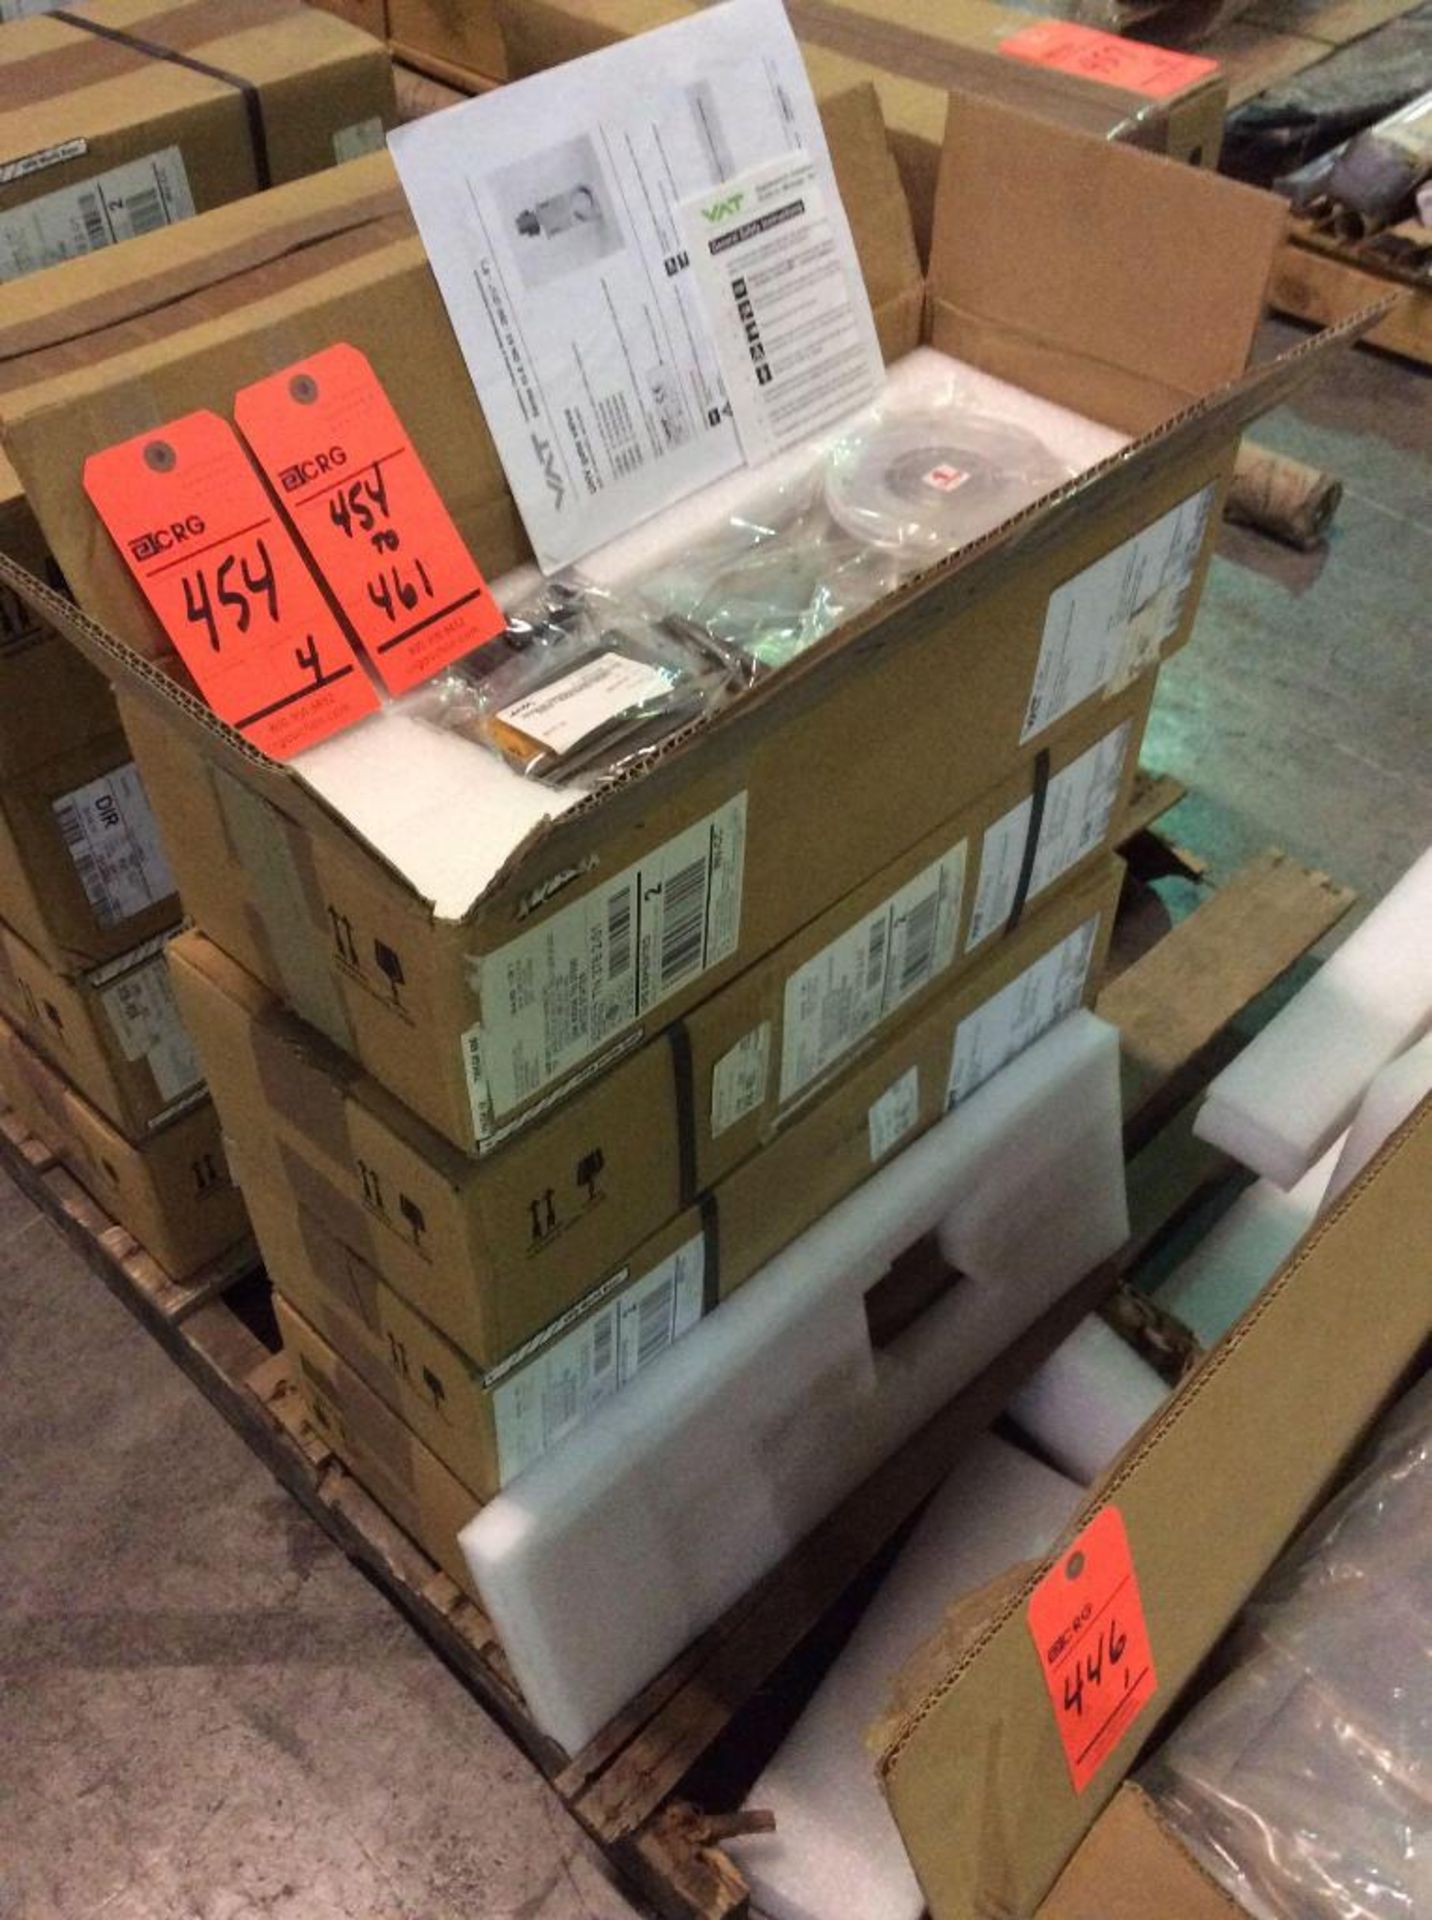 Lot of (4) VAT 2 1/2" stainless steel gate valves, mn 10836-PE44-0005 (NEW IN BOXES) - Image 4 of 5